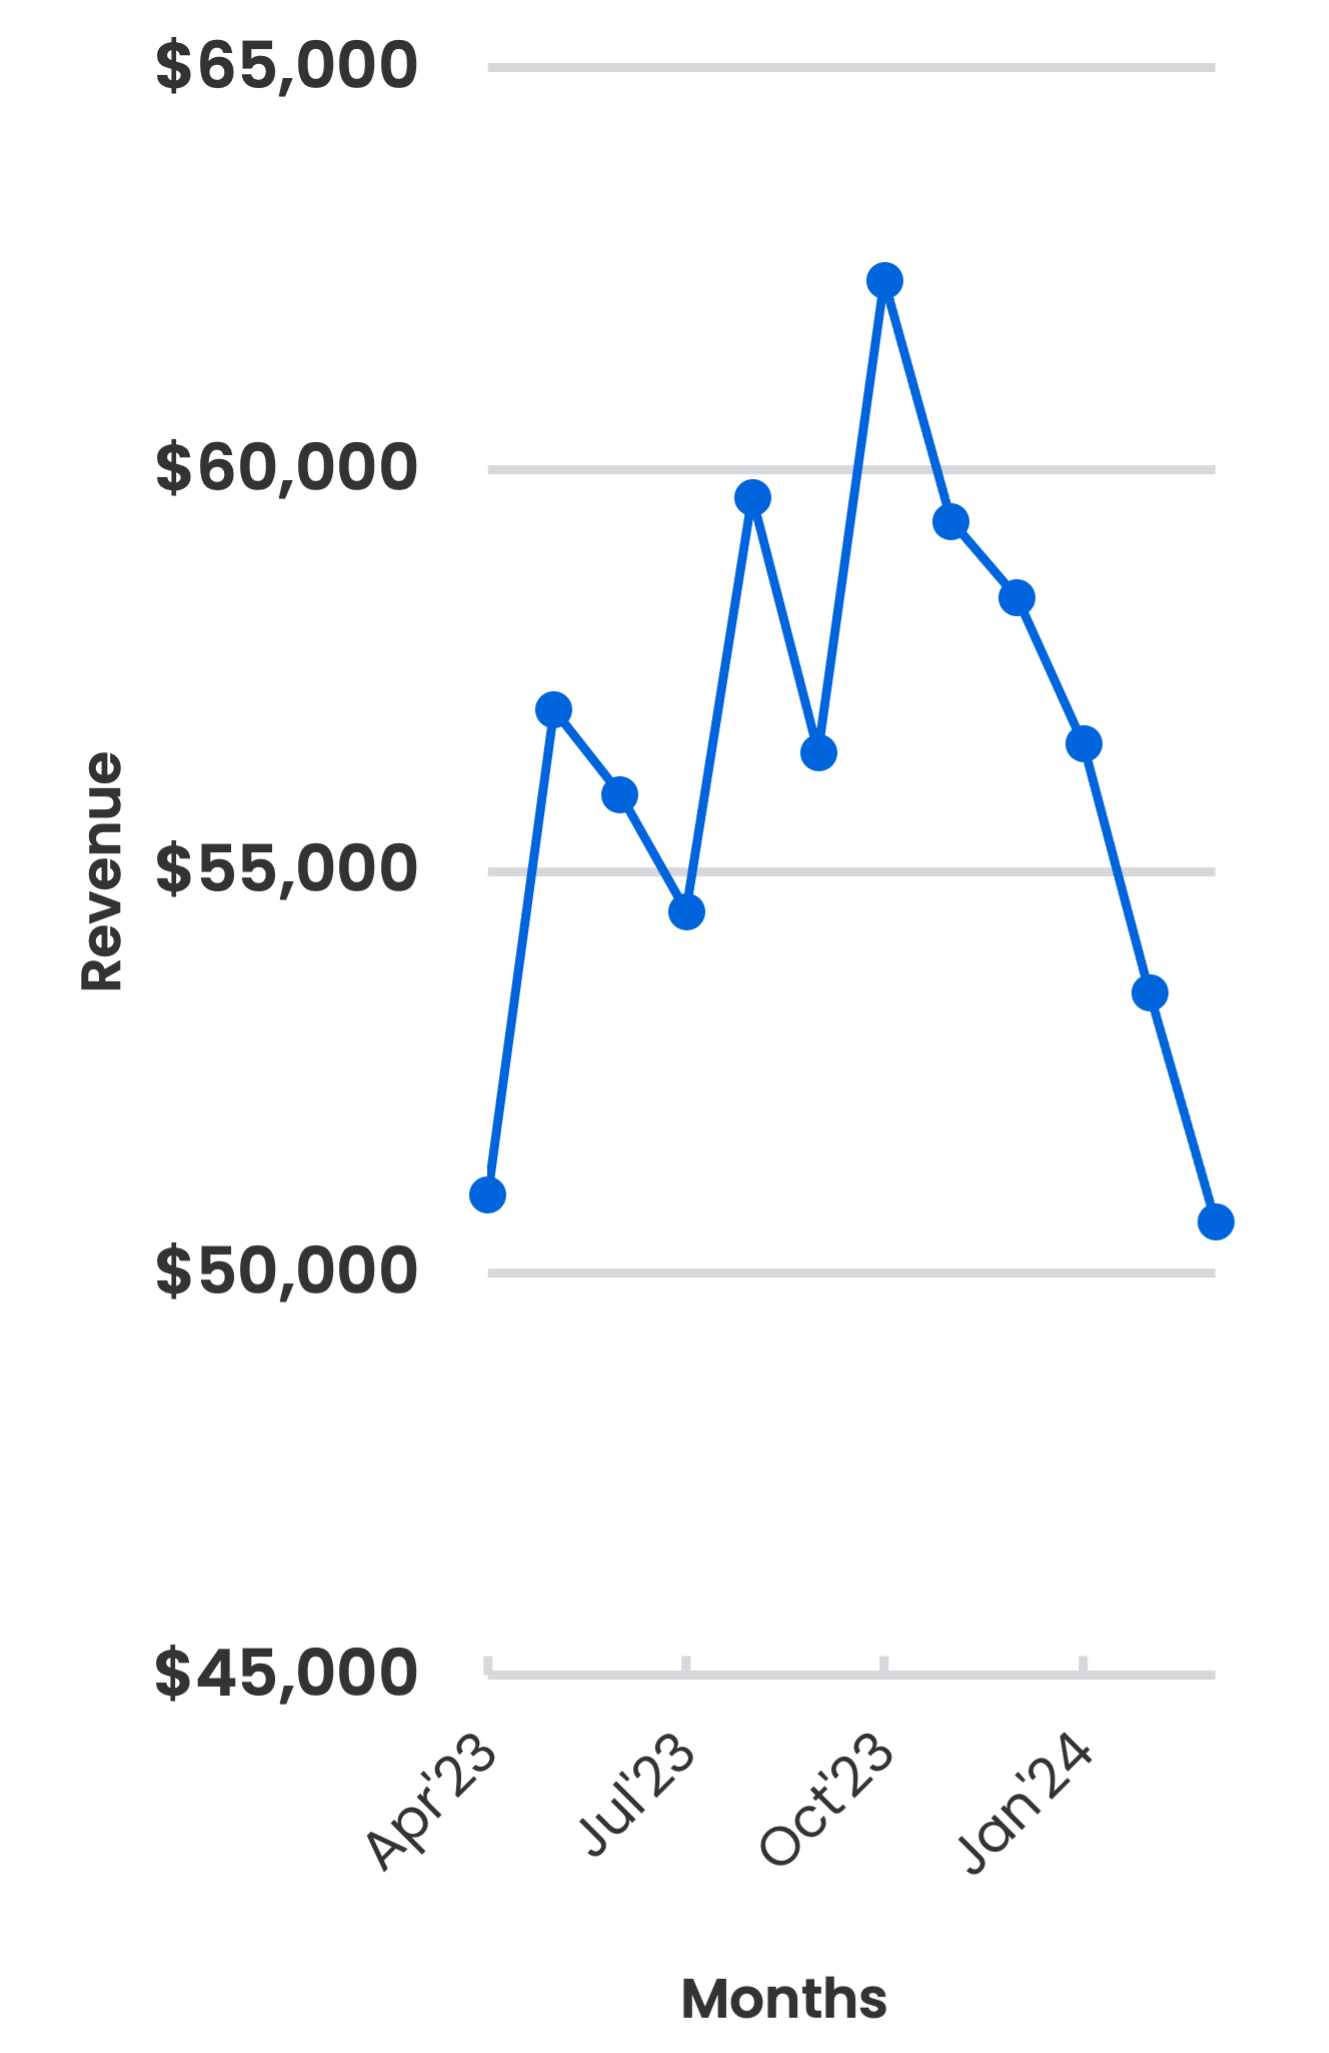 Line graph showing the median revenue (Y-axis) reported by small businesses over time by months (X-axis), over 12 months. The line generally displays an upward trend between April 2023 and October 2023, peaking at about $63,000 median revenue, then decreases to about $50,000 between October 2023 and March 2024.